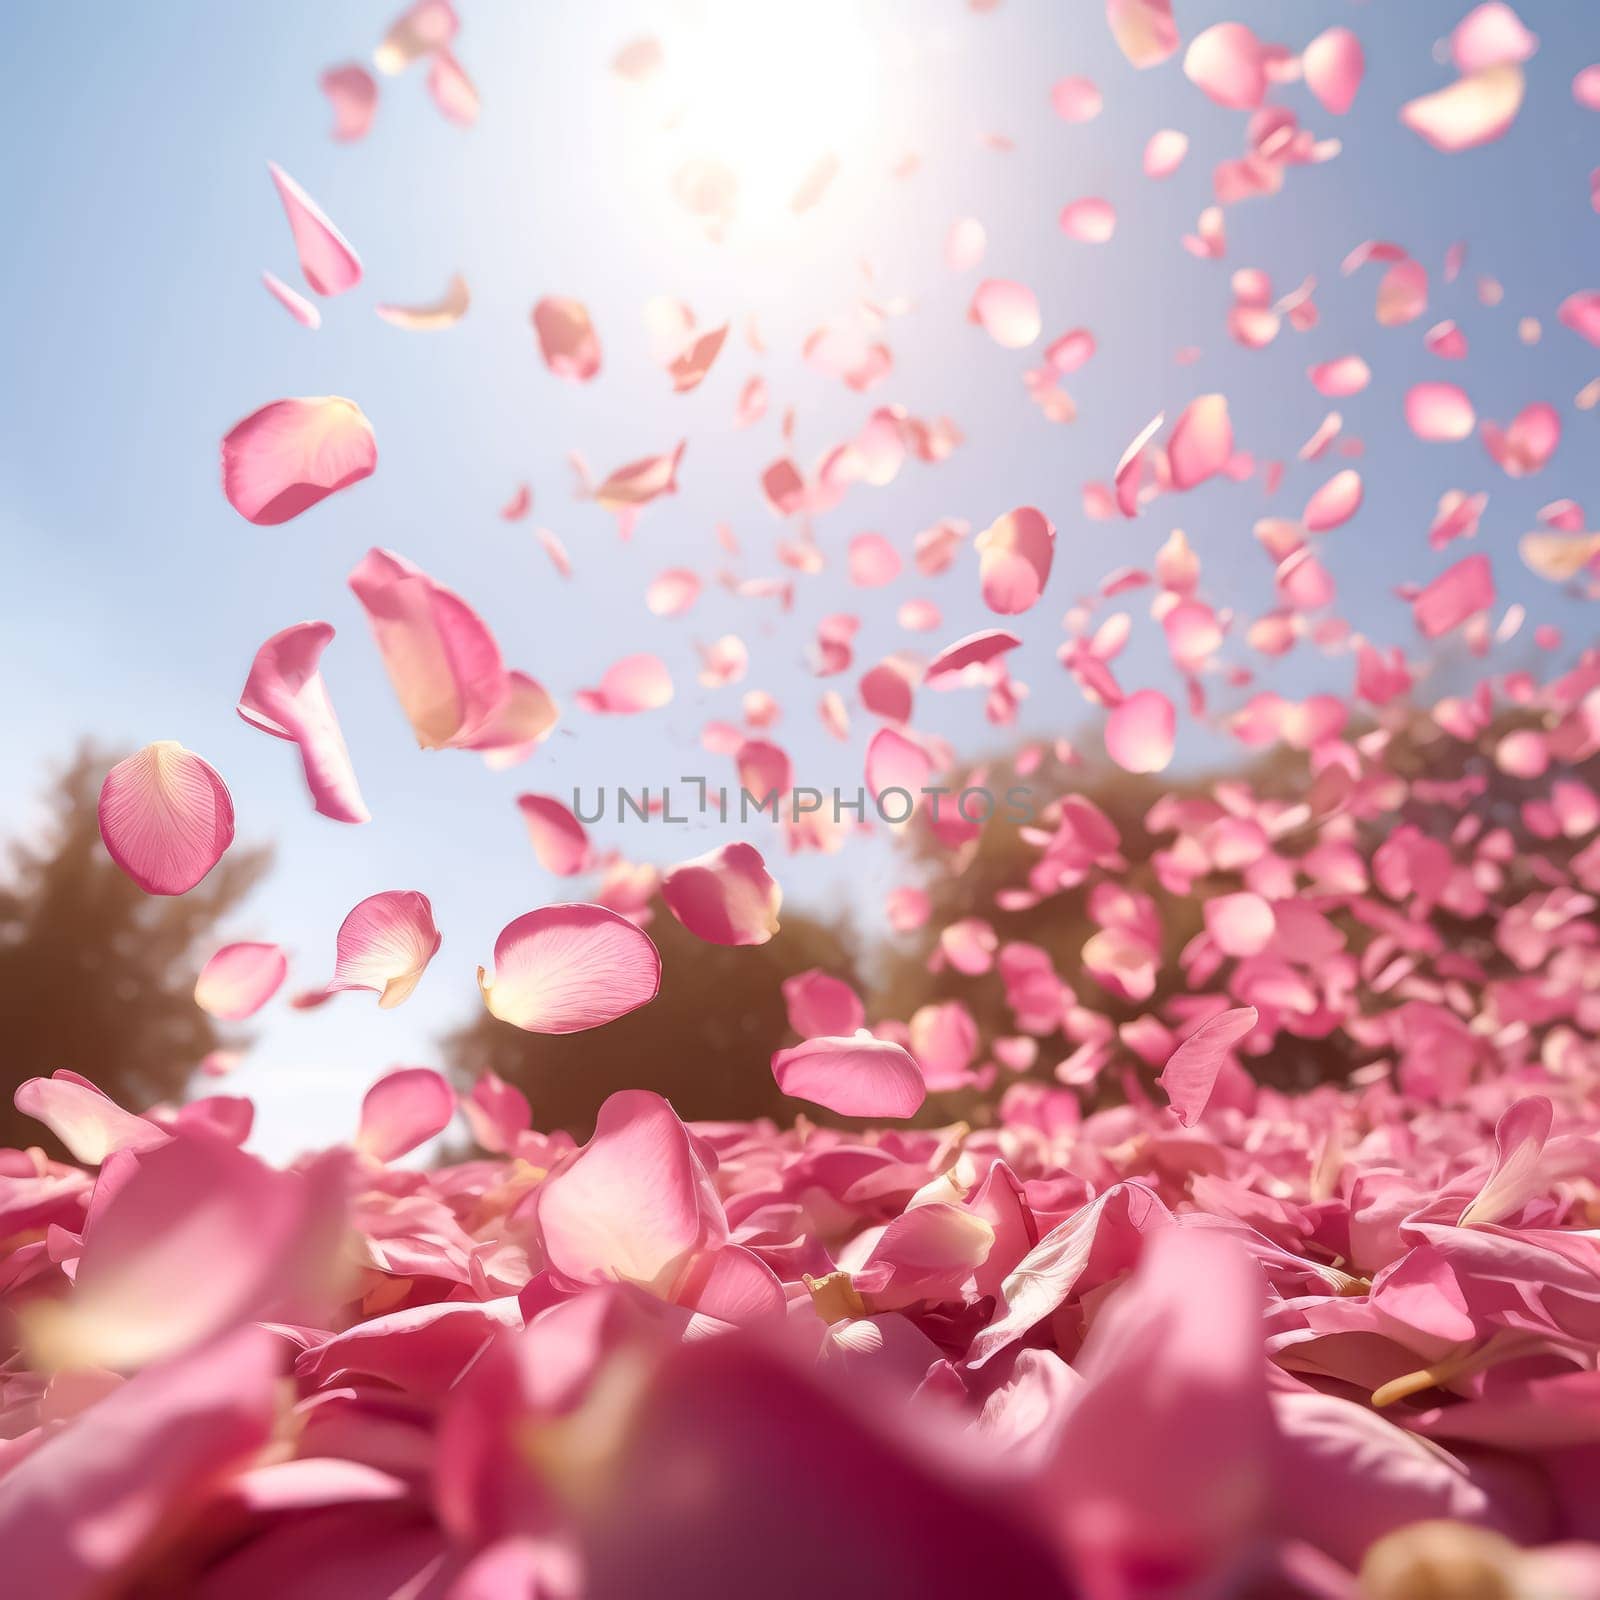 flying sakura petals create a delicate dance against a blurred lights background by Alla_Morozova93